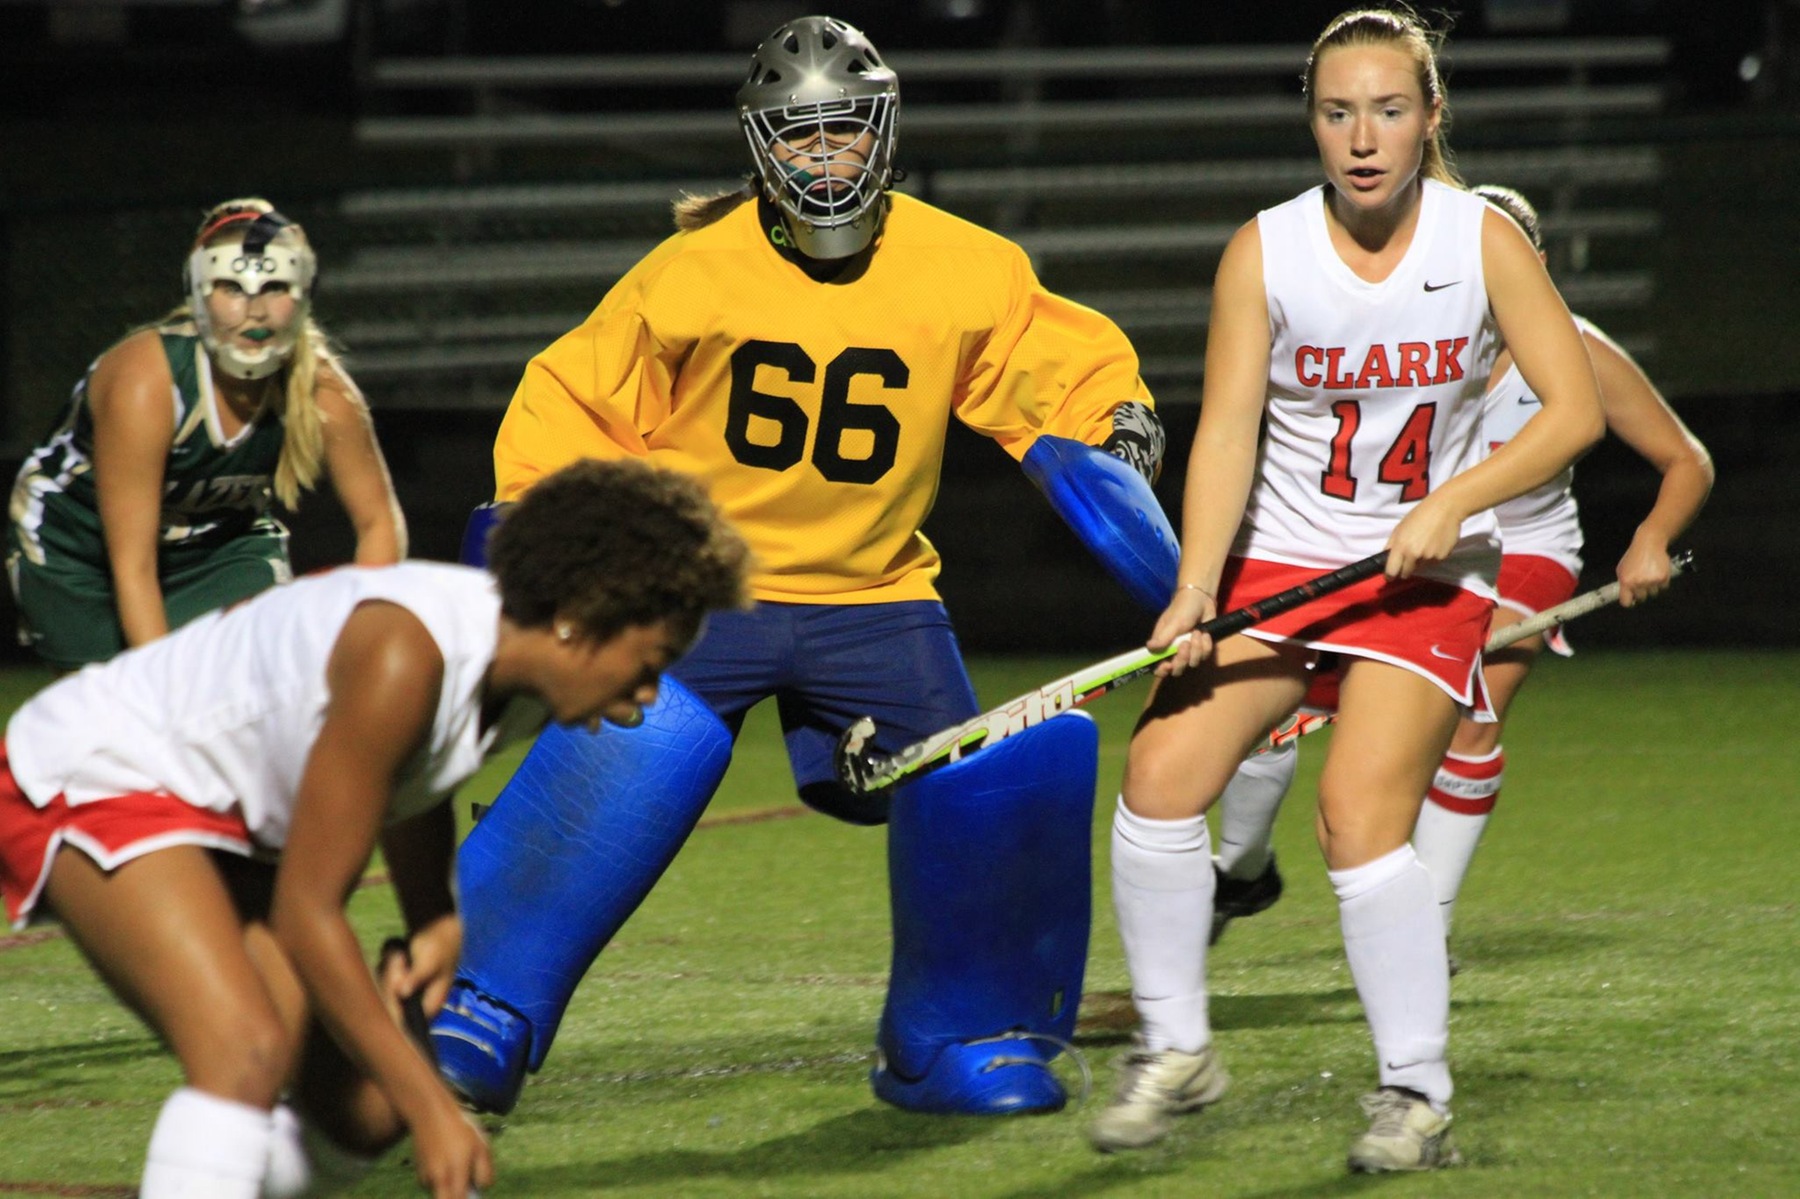 Strong Second Half Lifts Clark Over Field Hockey